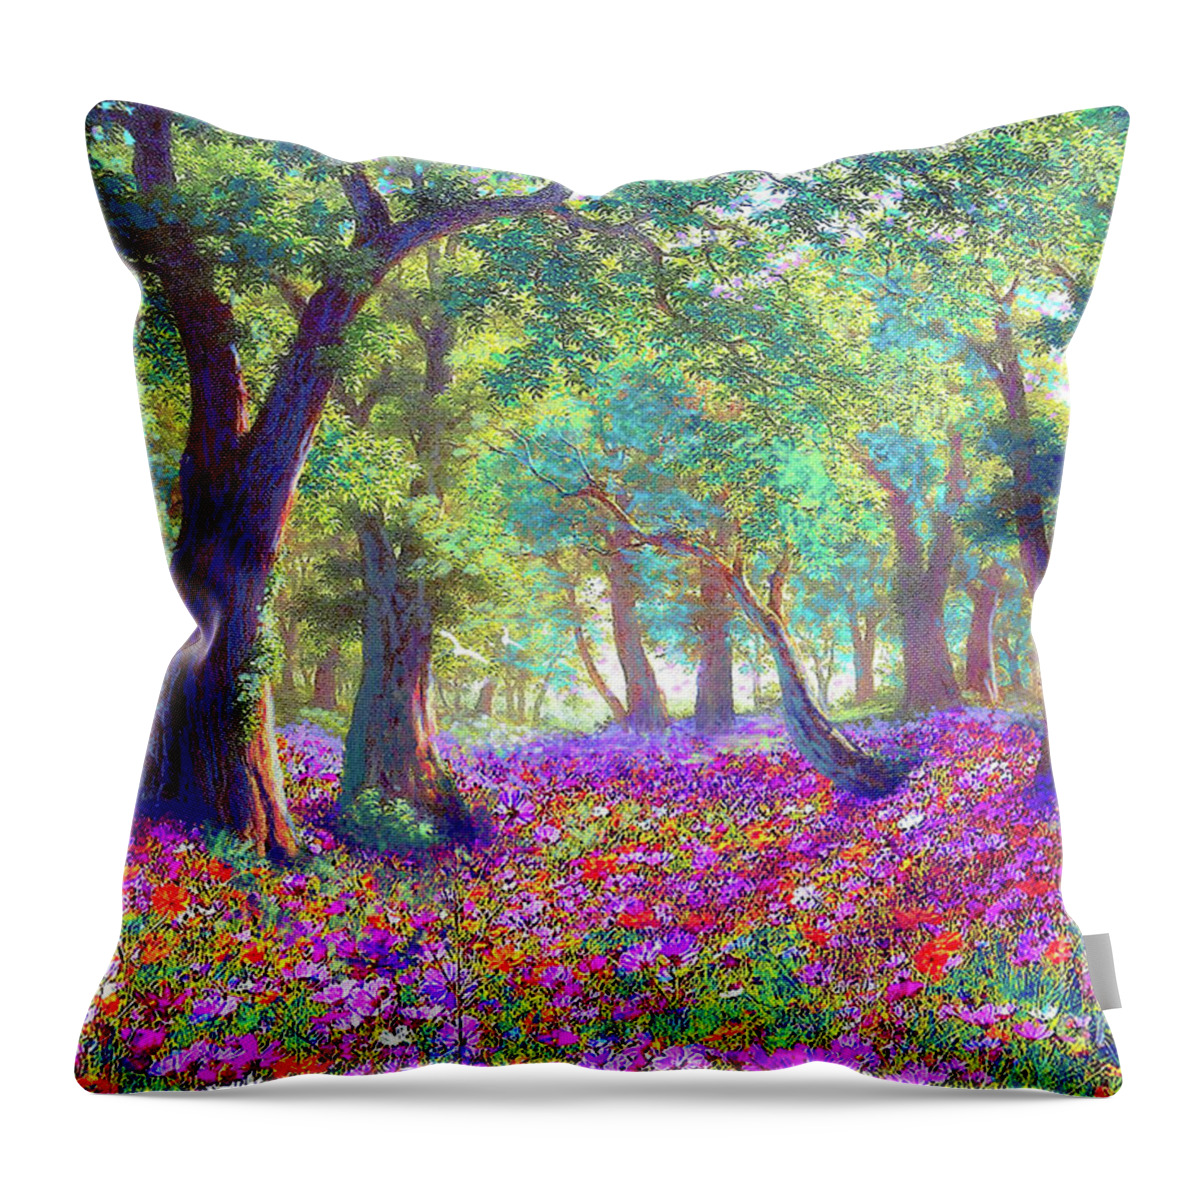 Landscape Throw Pillow featuring the painting Morning Dew by Jane Small